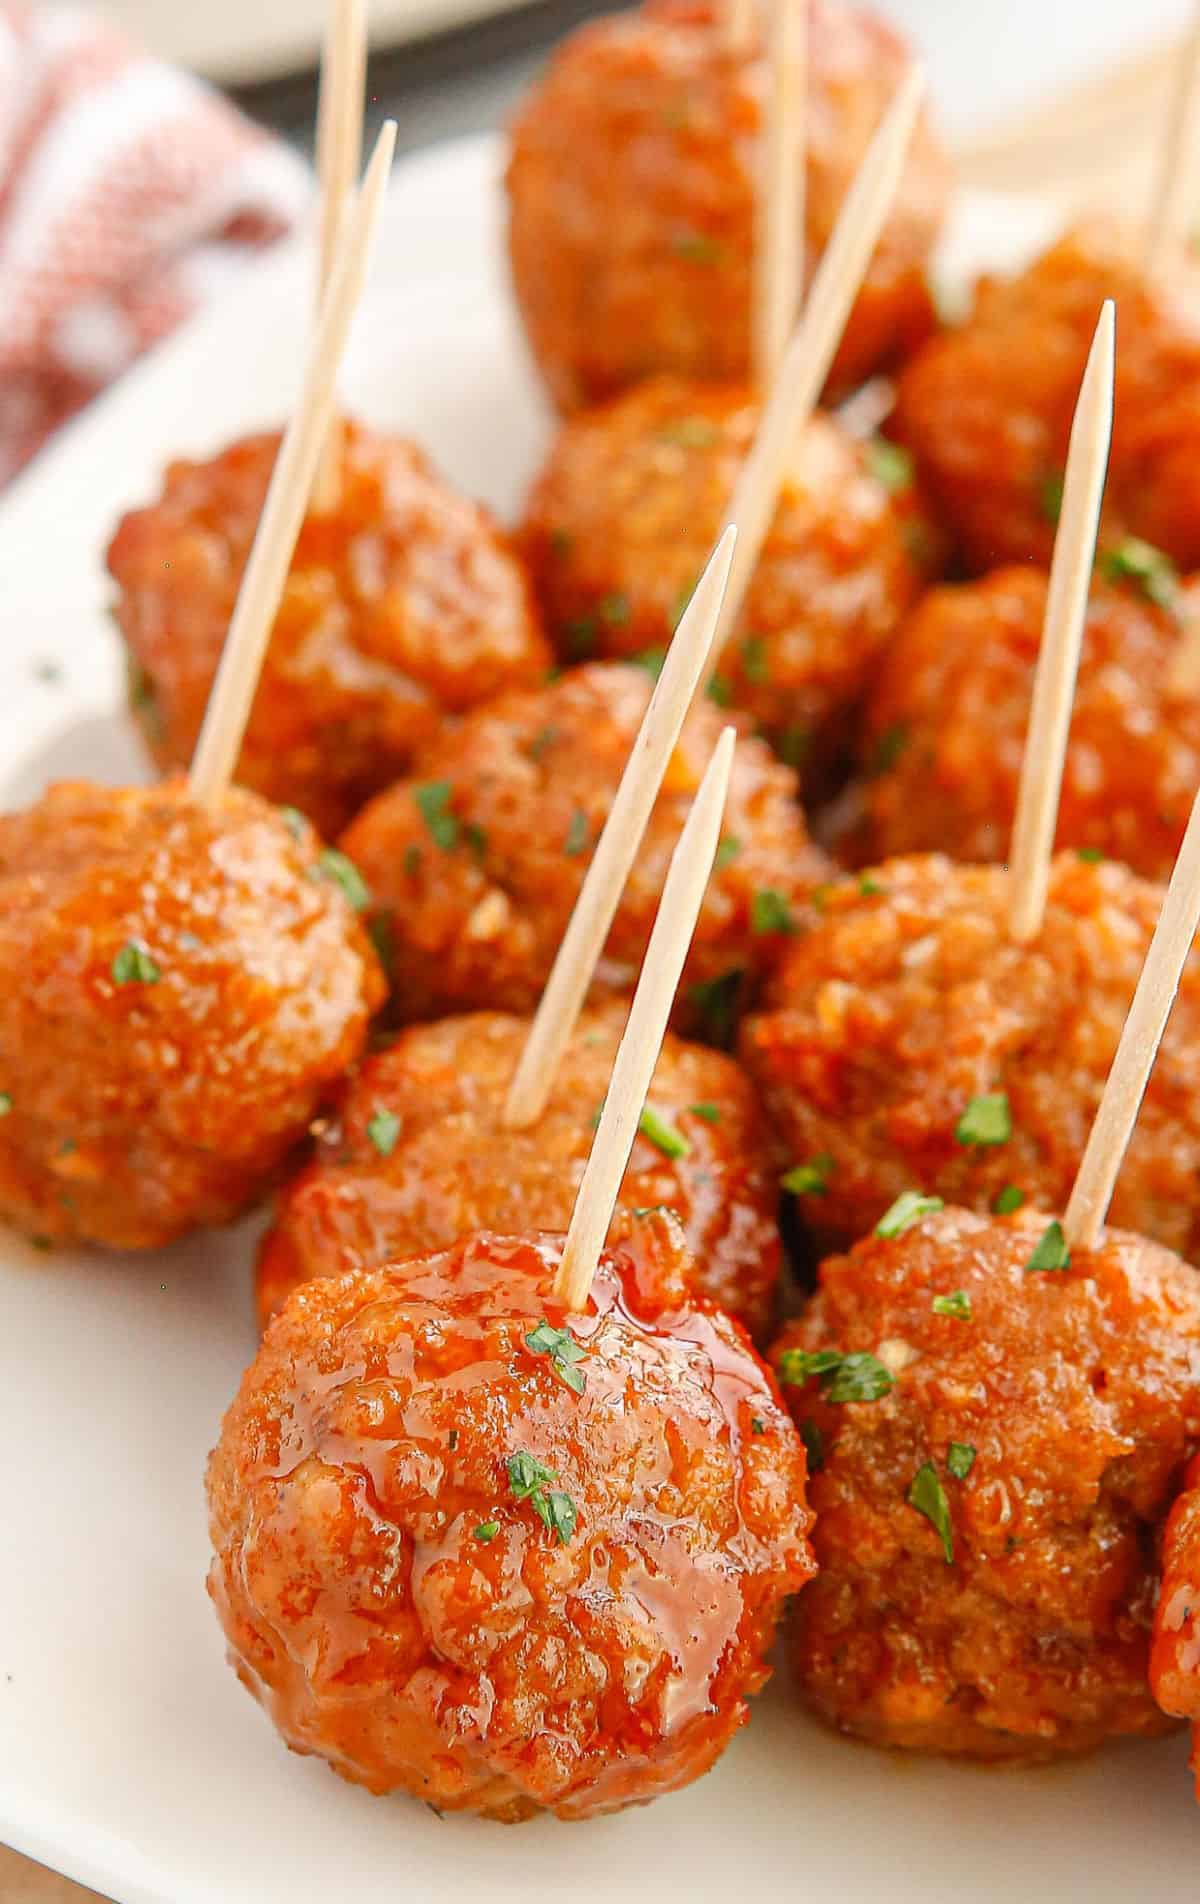 A close up photo of meatballs.